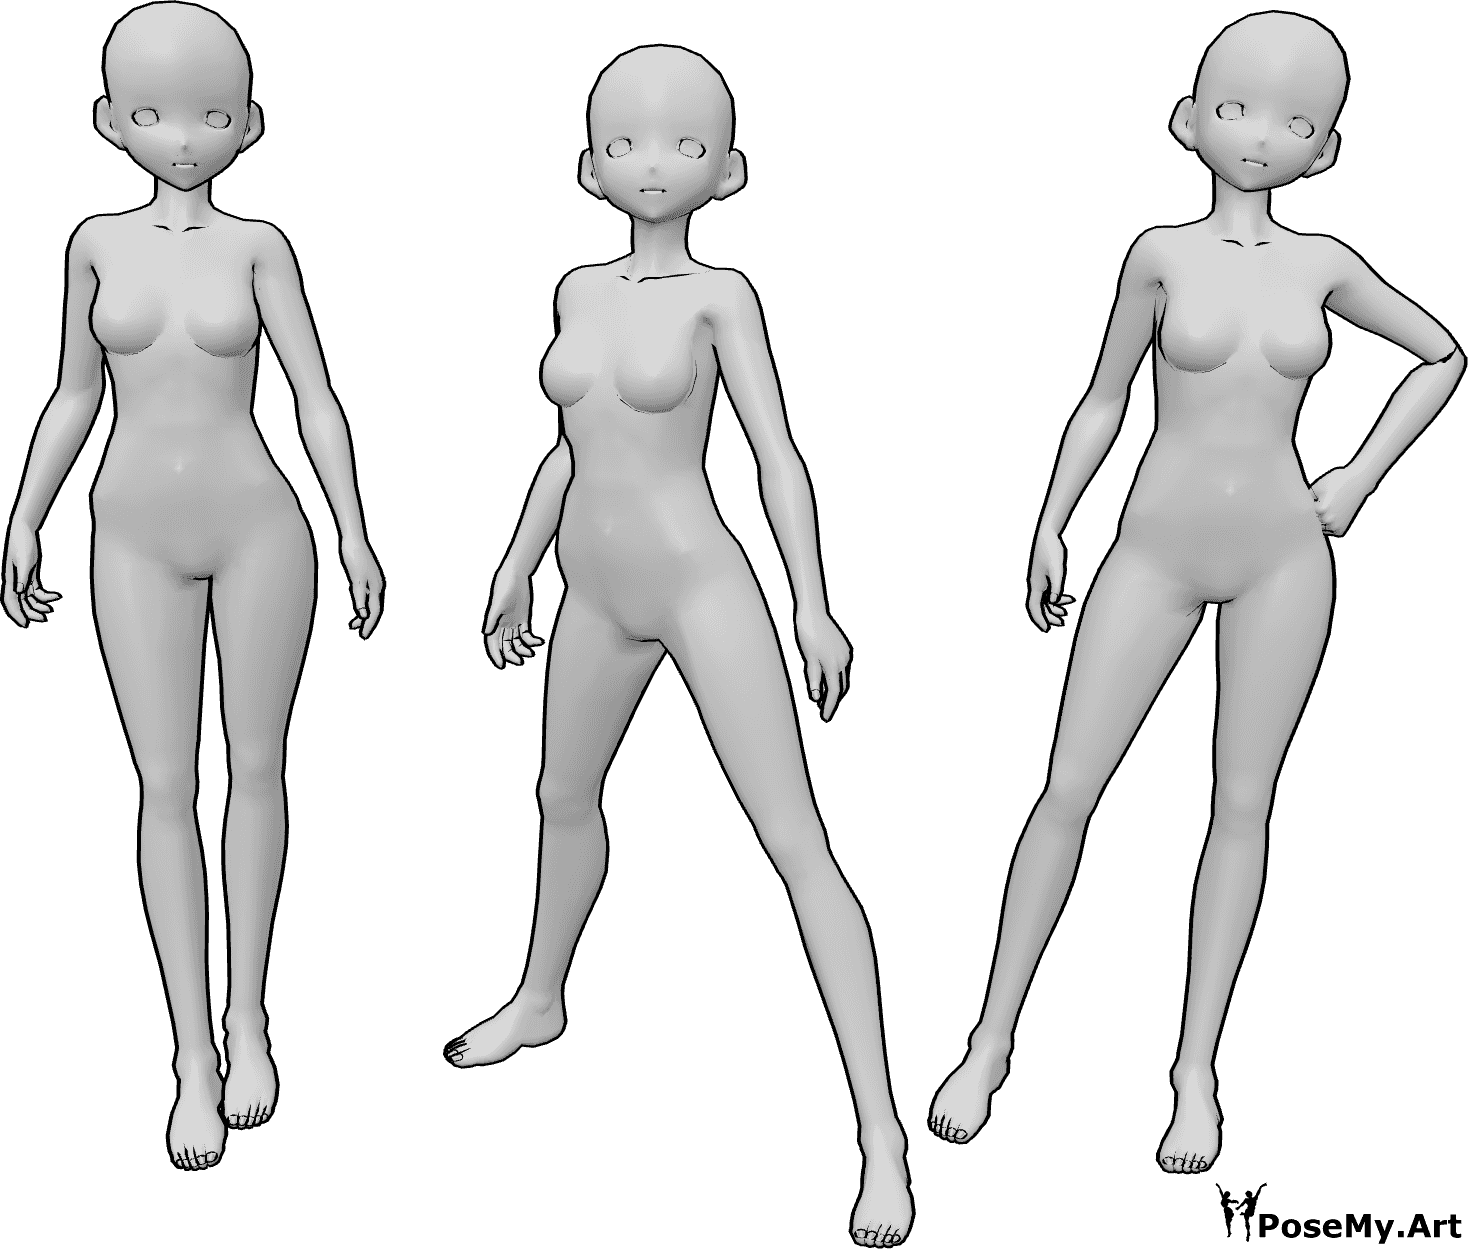 https://posemy.art/assets/poses_imgs/528_trimmed.png